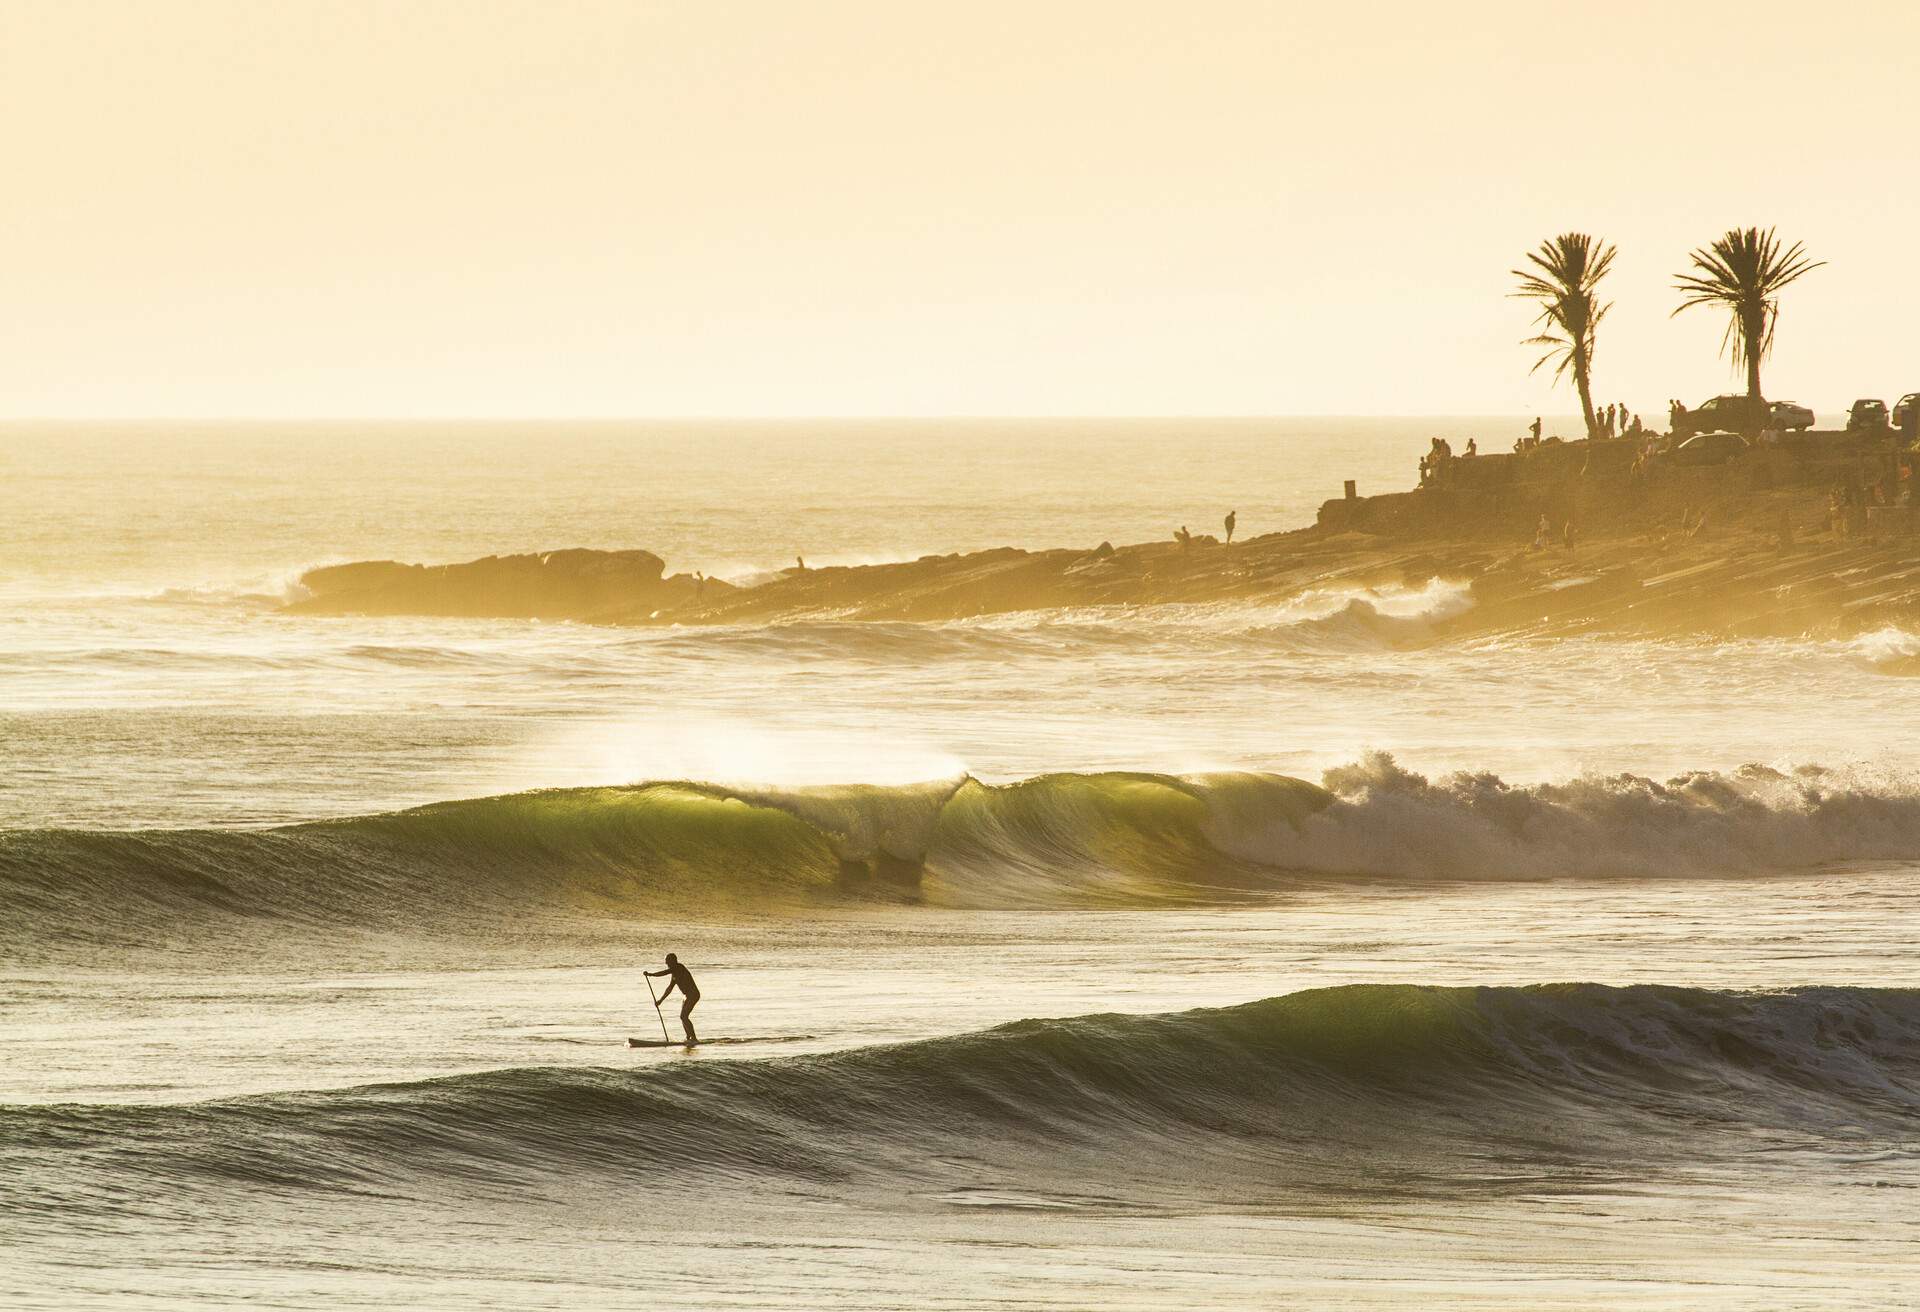 An evening surf session at Anchor point, TAGHAZOUT, Morocco